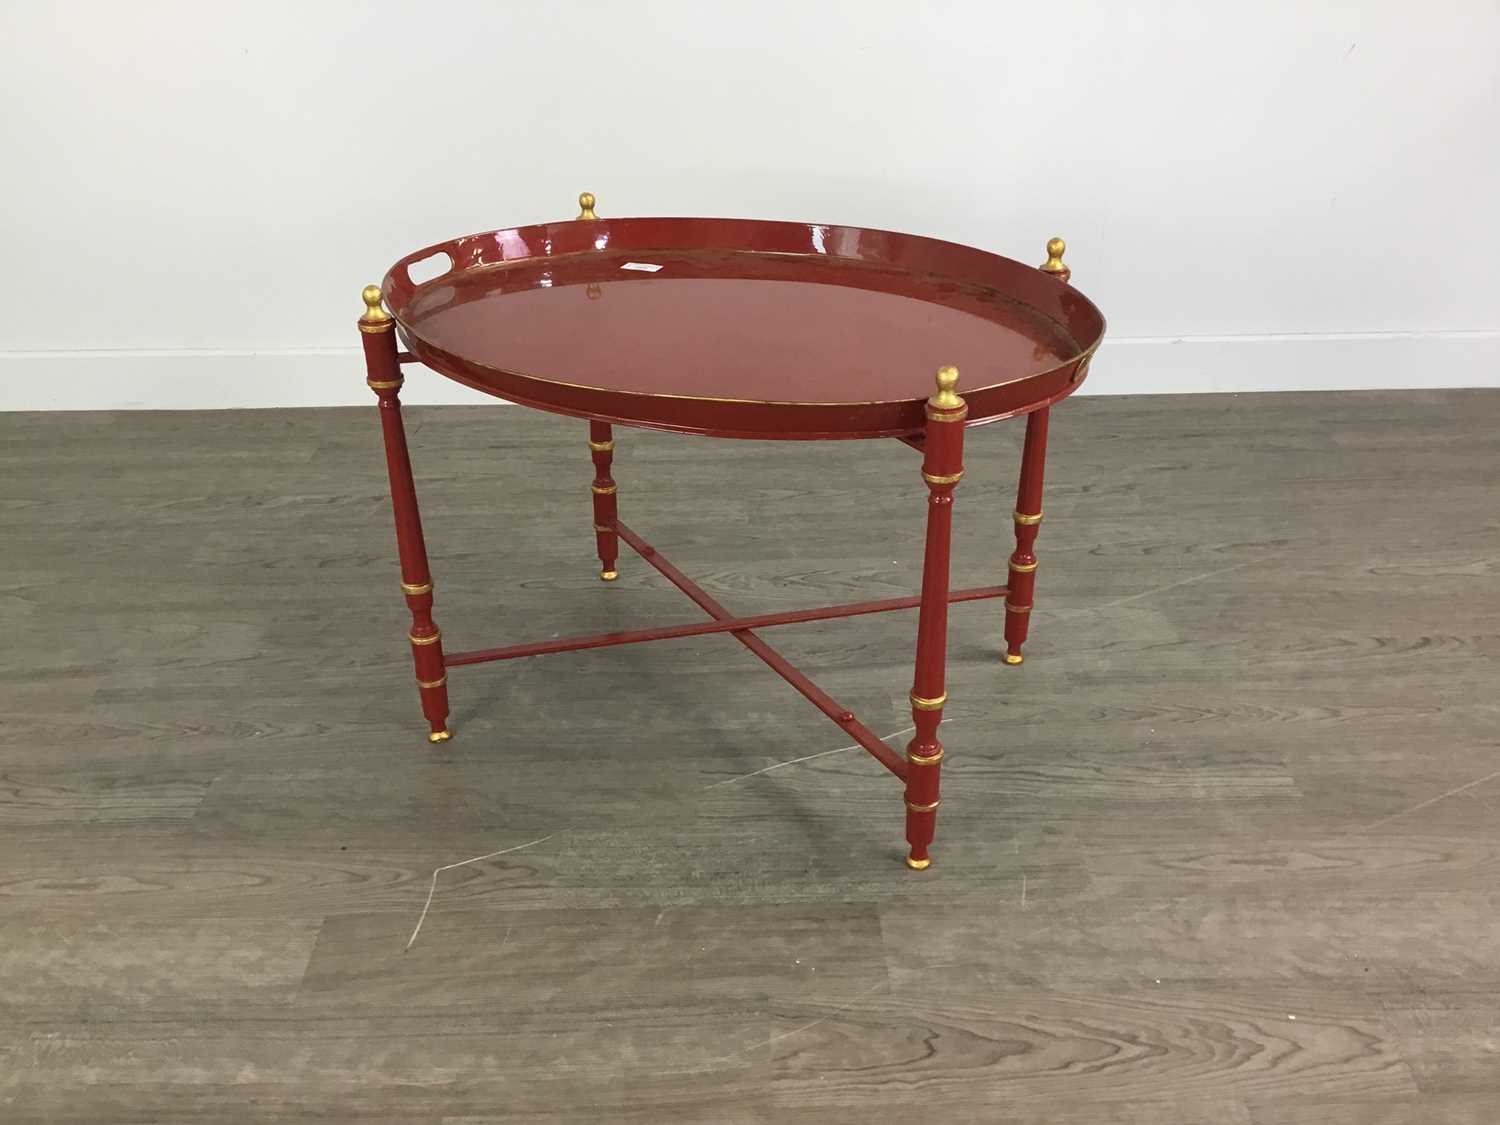 Lot 1099 - AN ITALIAN ENAMELLED METAL OVAL TRAY ON STAND